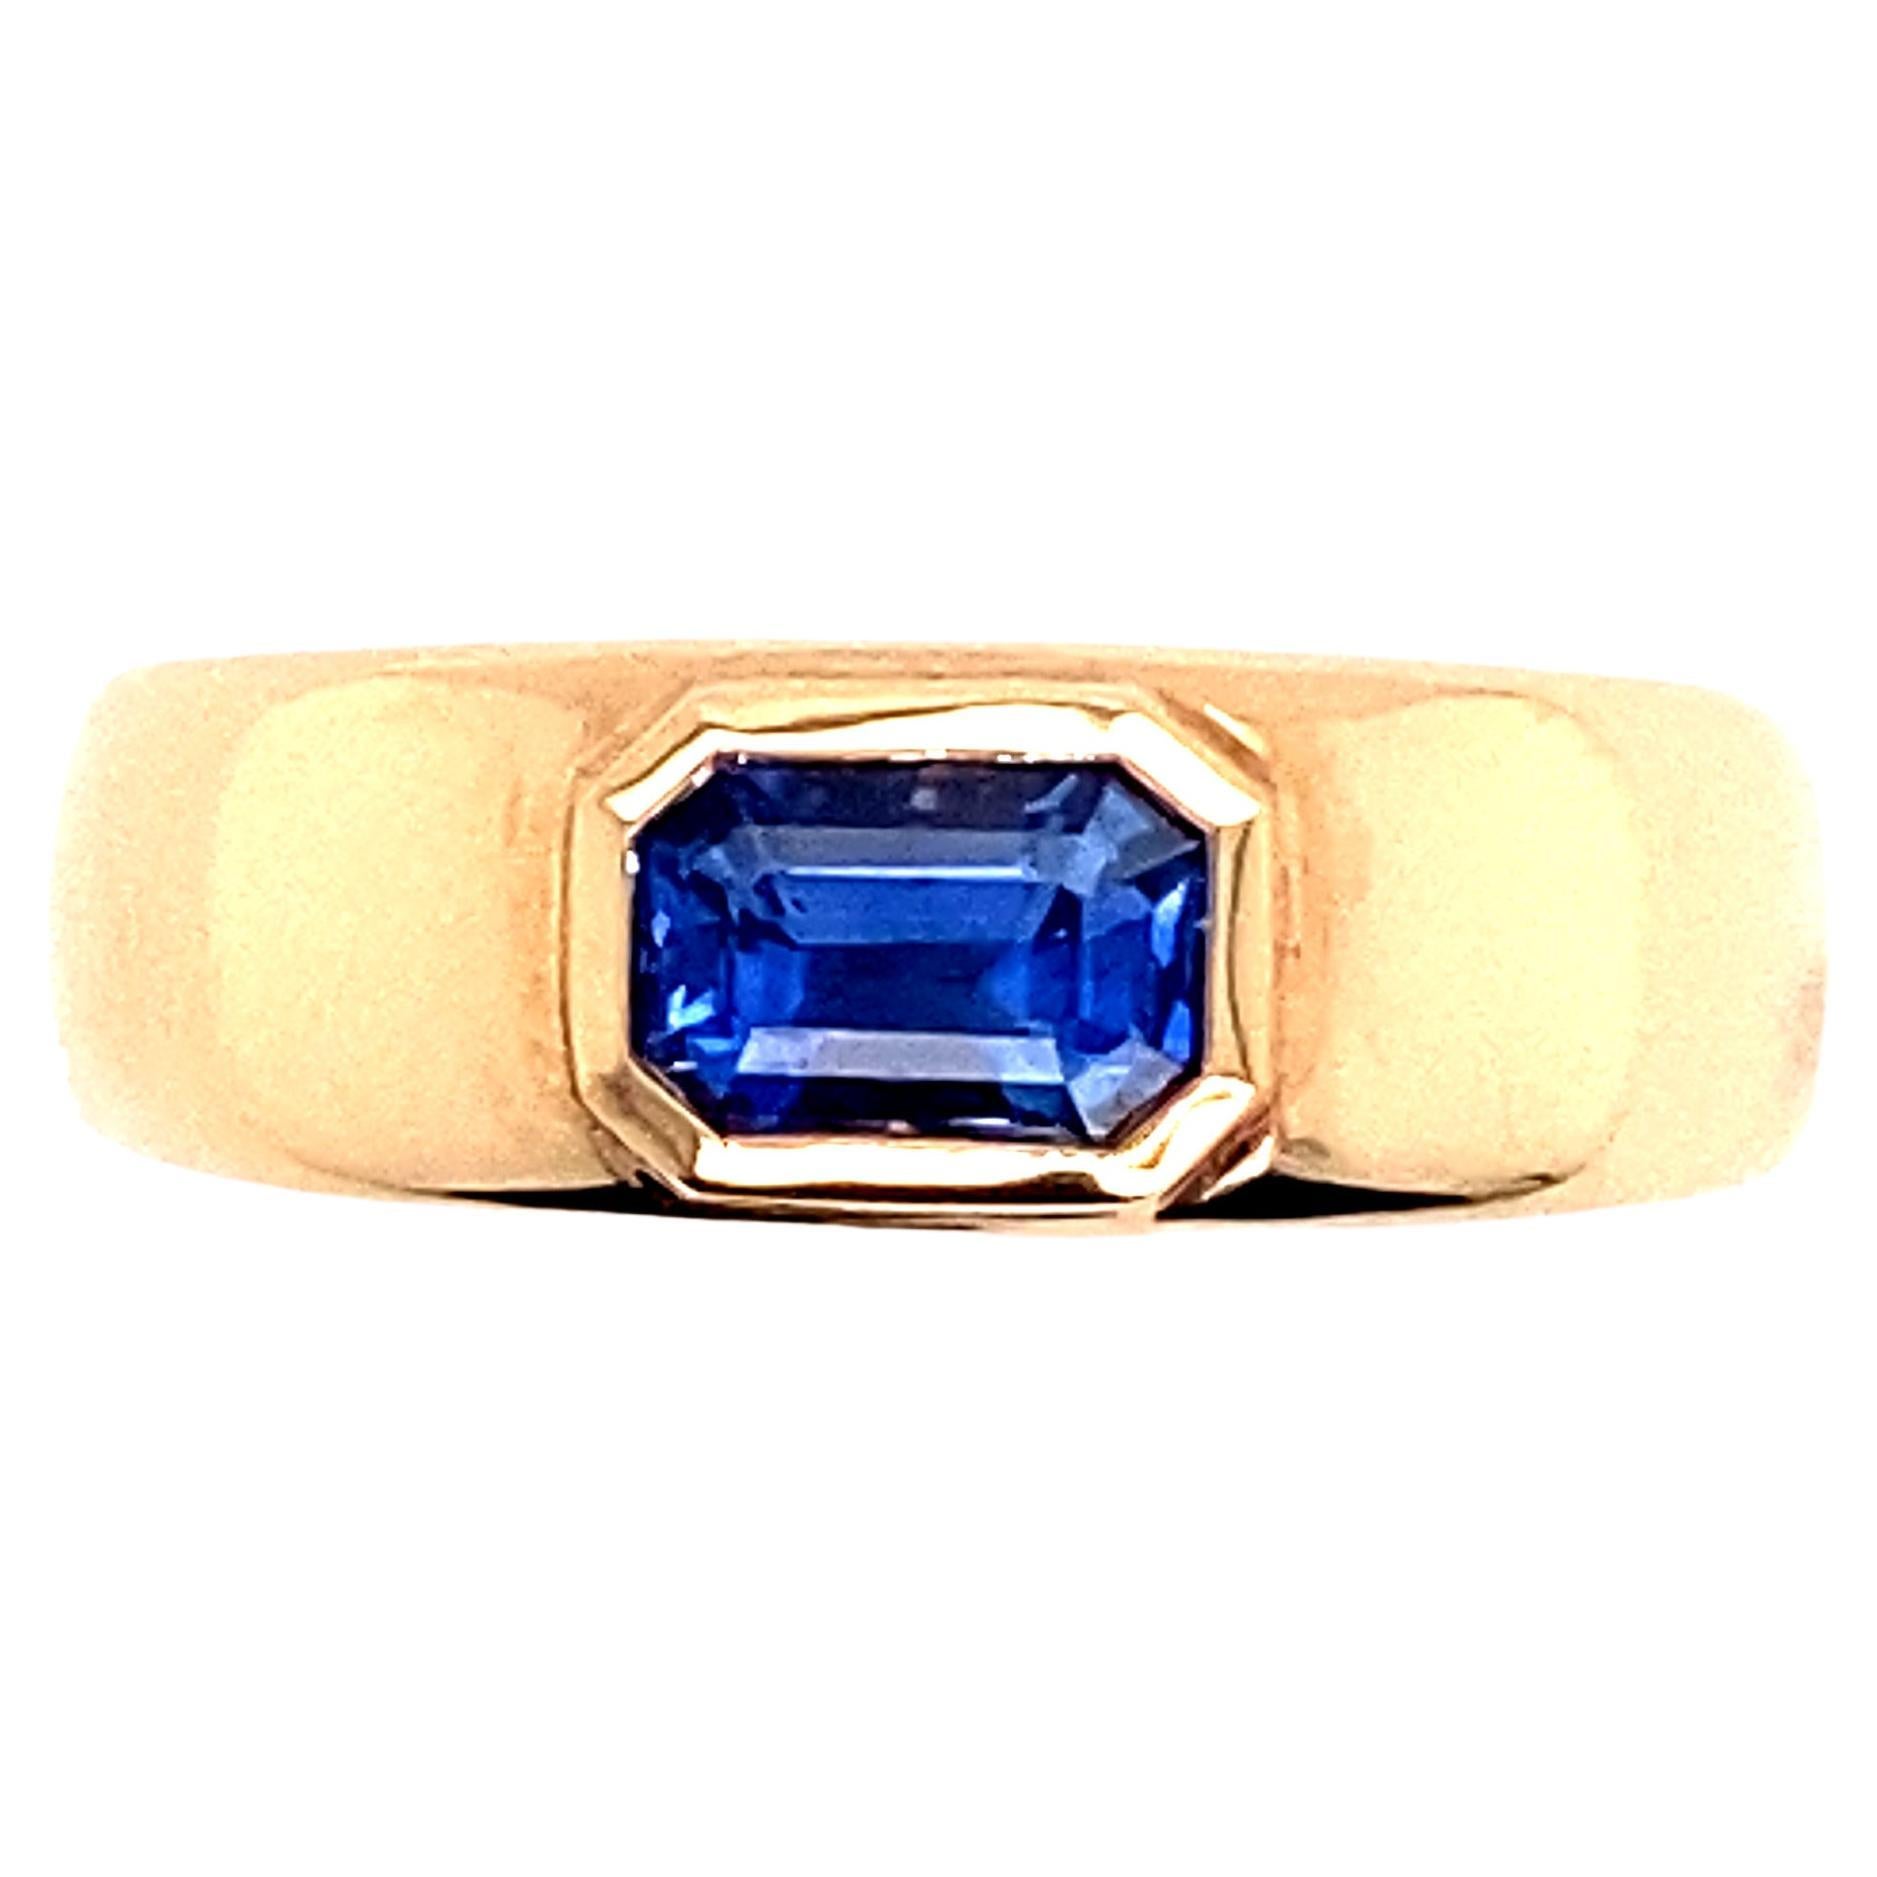 Ring with It's Blue Sapphire Emerald Cut or RPC Pink Gold 18 Karat  For Sale